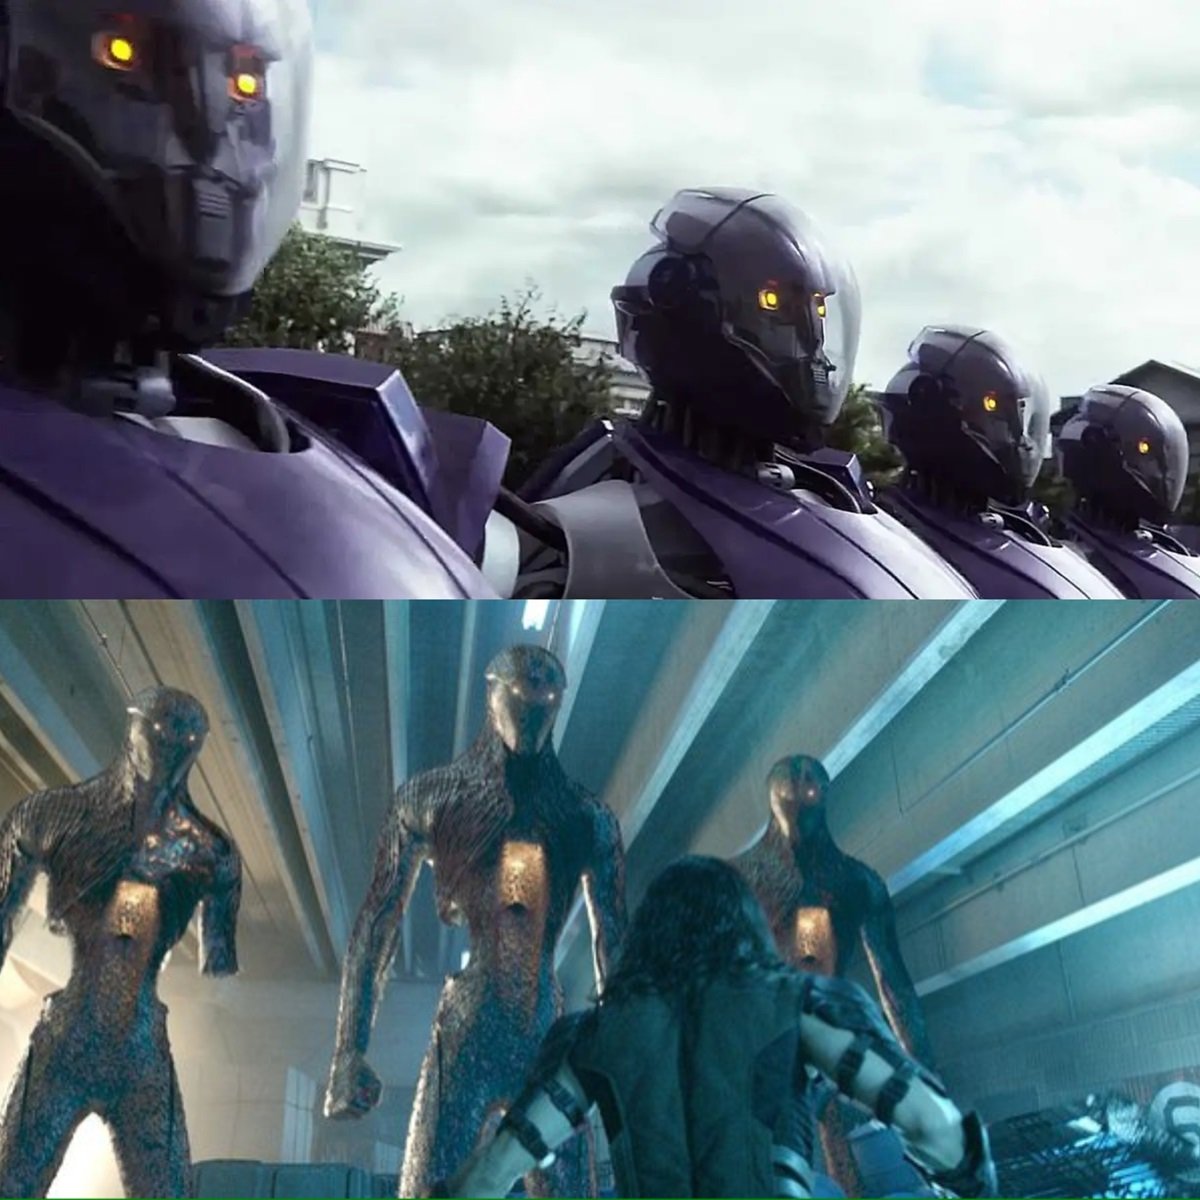 The Fox live-action films' version of the Sentinels from X-Men: Days of Future Past.